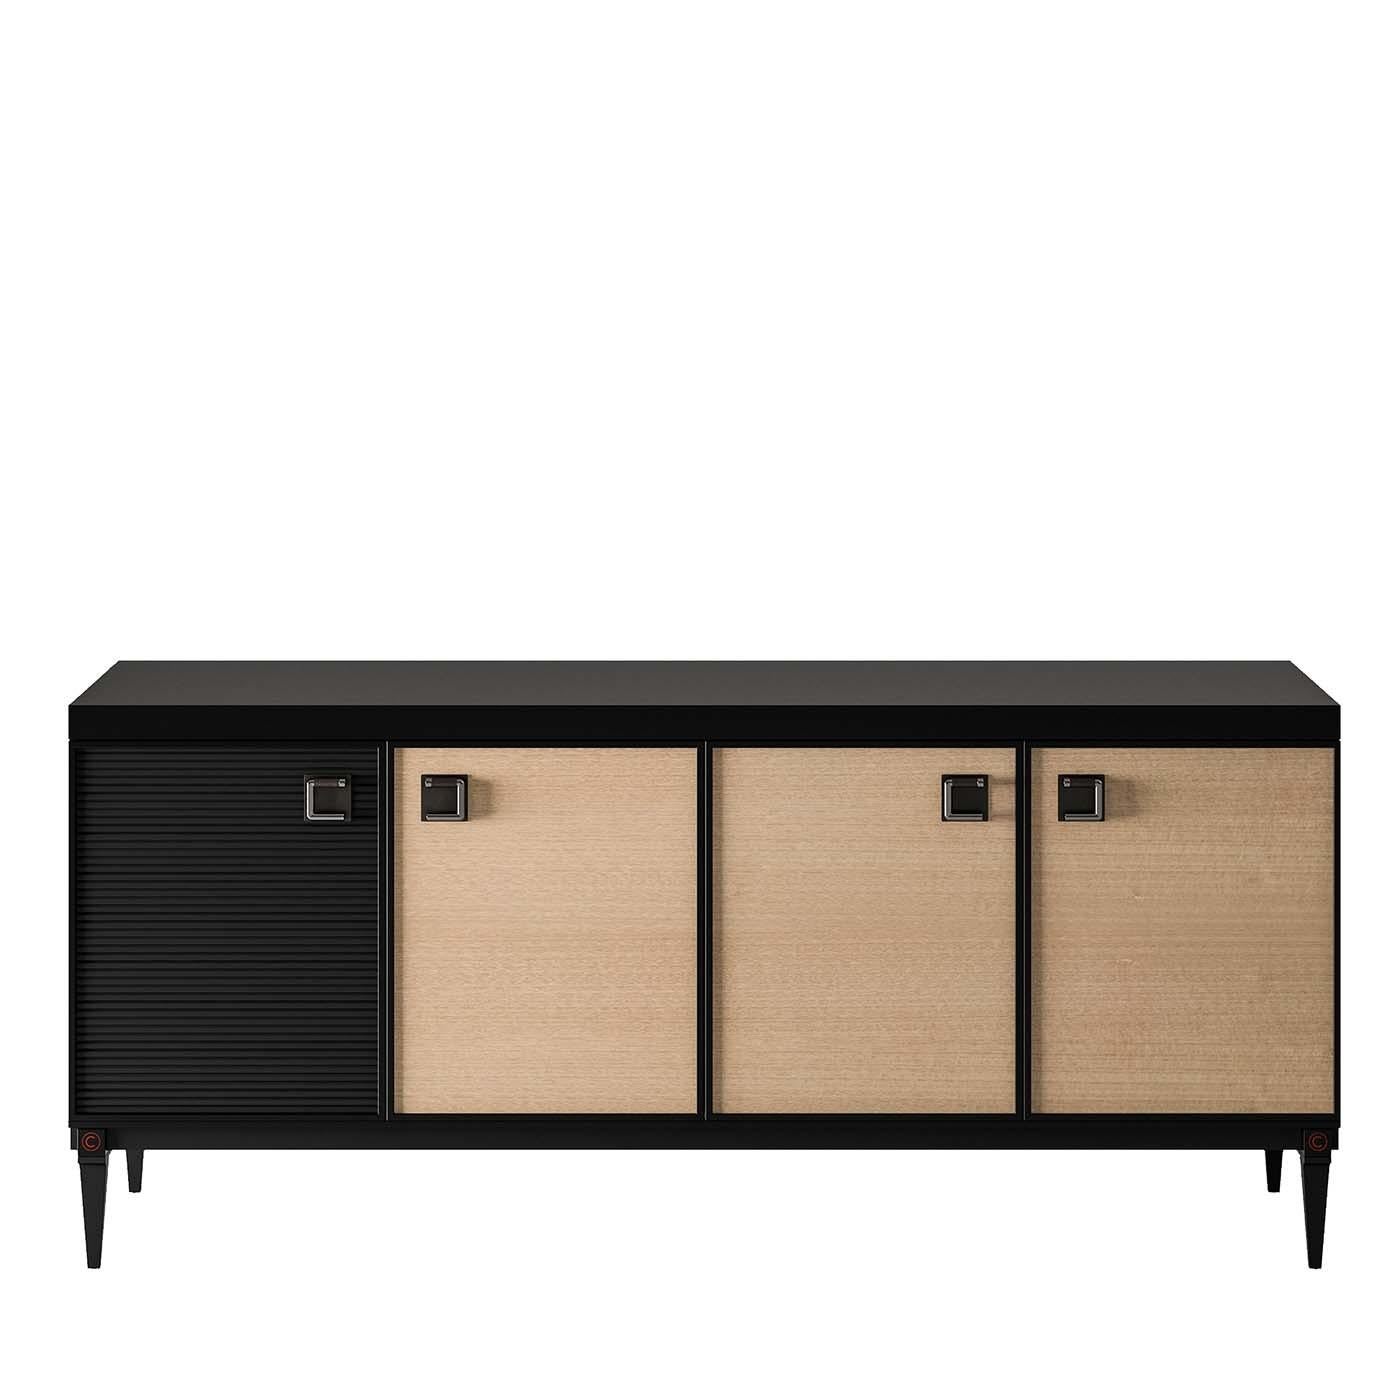 This midcentury-inspired sideboard stands out for the masterful craftsmanship and elegance of its design that evokes Classic furniture. The impeccable construction features a frame with black-lacquered eucalyptus veneer and four doors, three with a